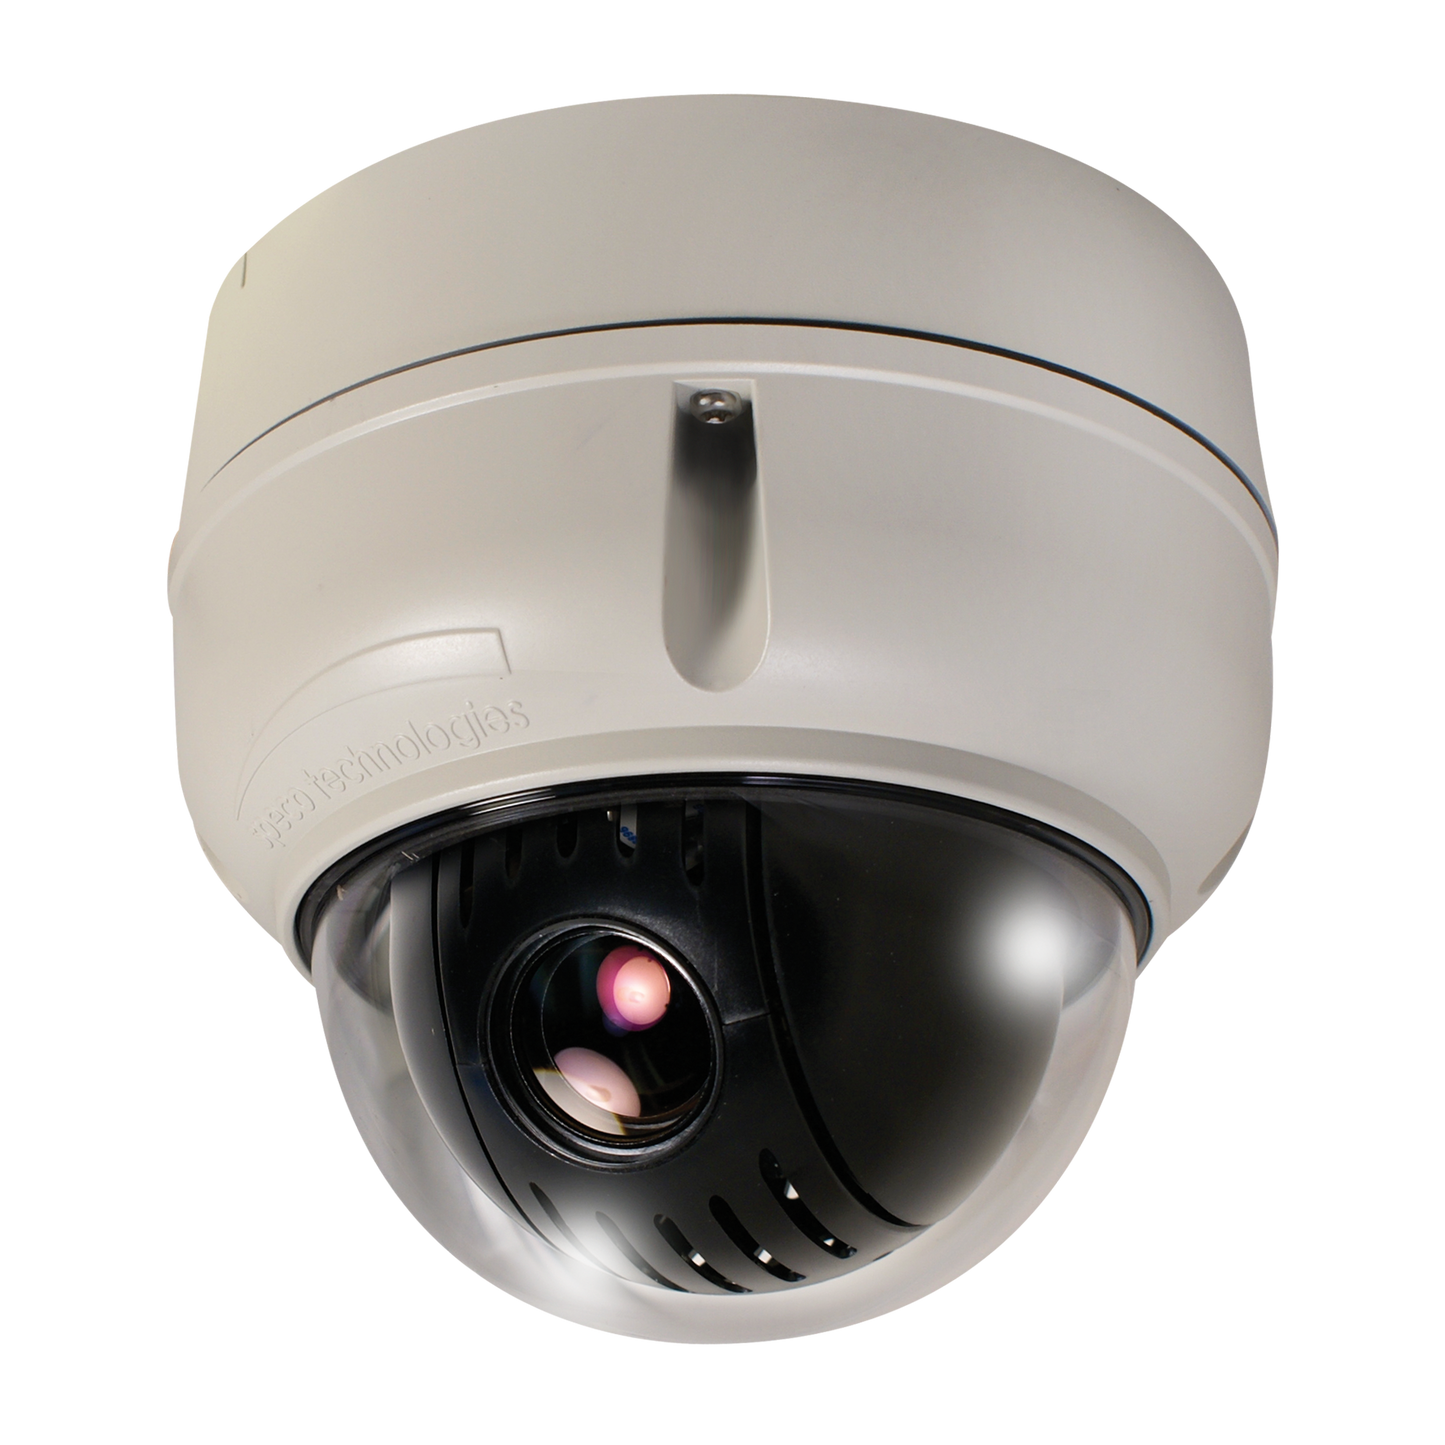 2MP HD-TVI Indoor/Outdoor PTZ Speed Dome Camera with 20x Optical Zoom Lens